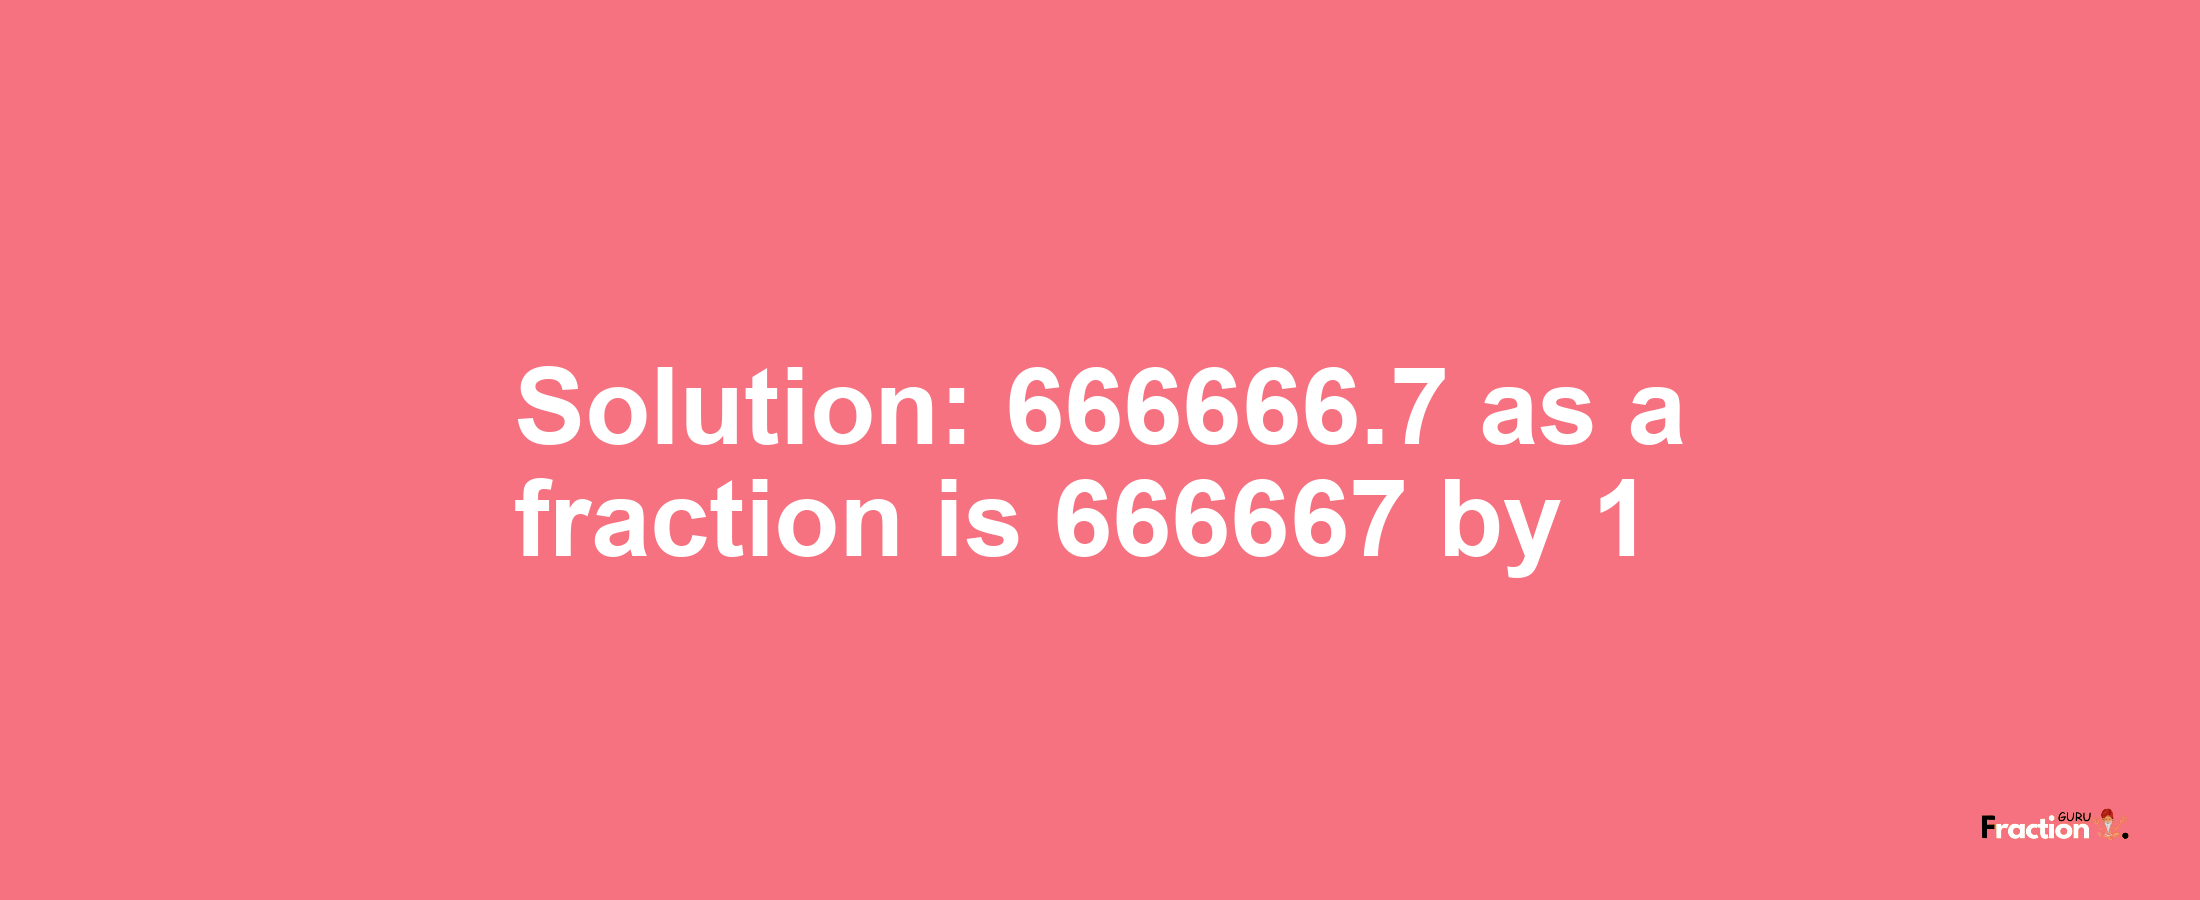 Solution:666666.7 as a fraction is 666667/1